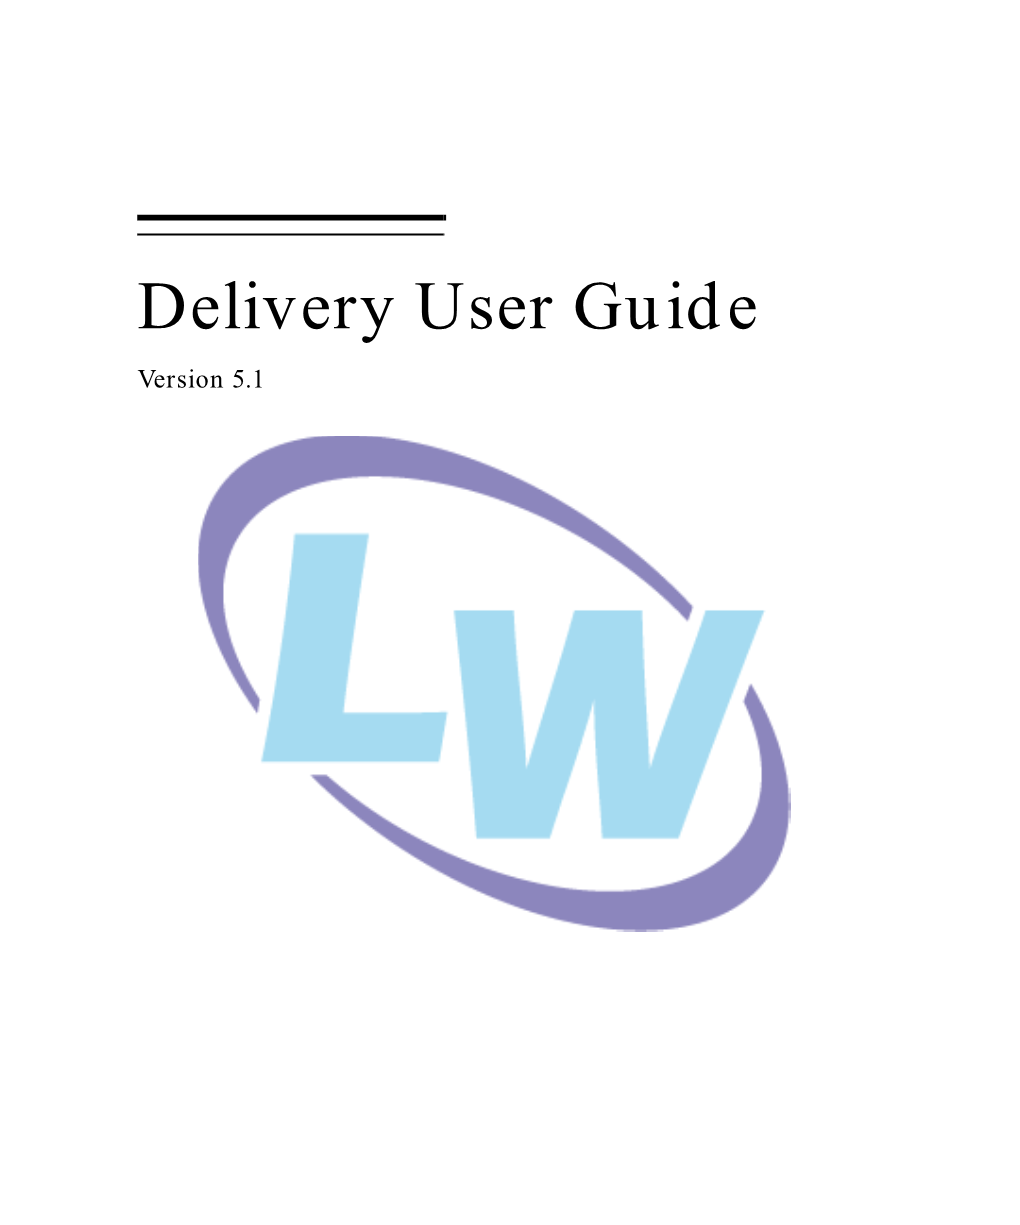 Delivery User Guide Version 5.1 Copyright and Trademarks Lispworks Delivery User Guide Version 5.1 March 2008 Copyright © 2008 by Lispworks Ltd